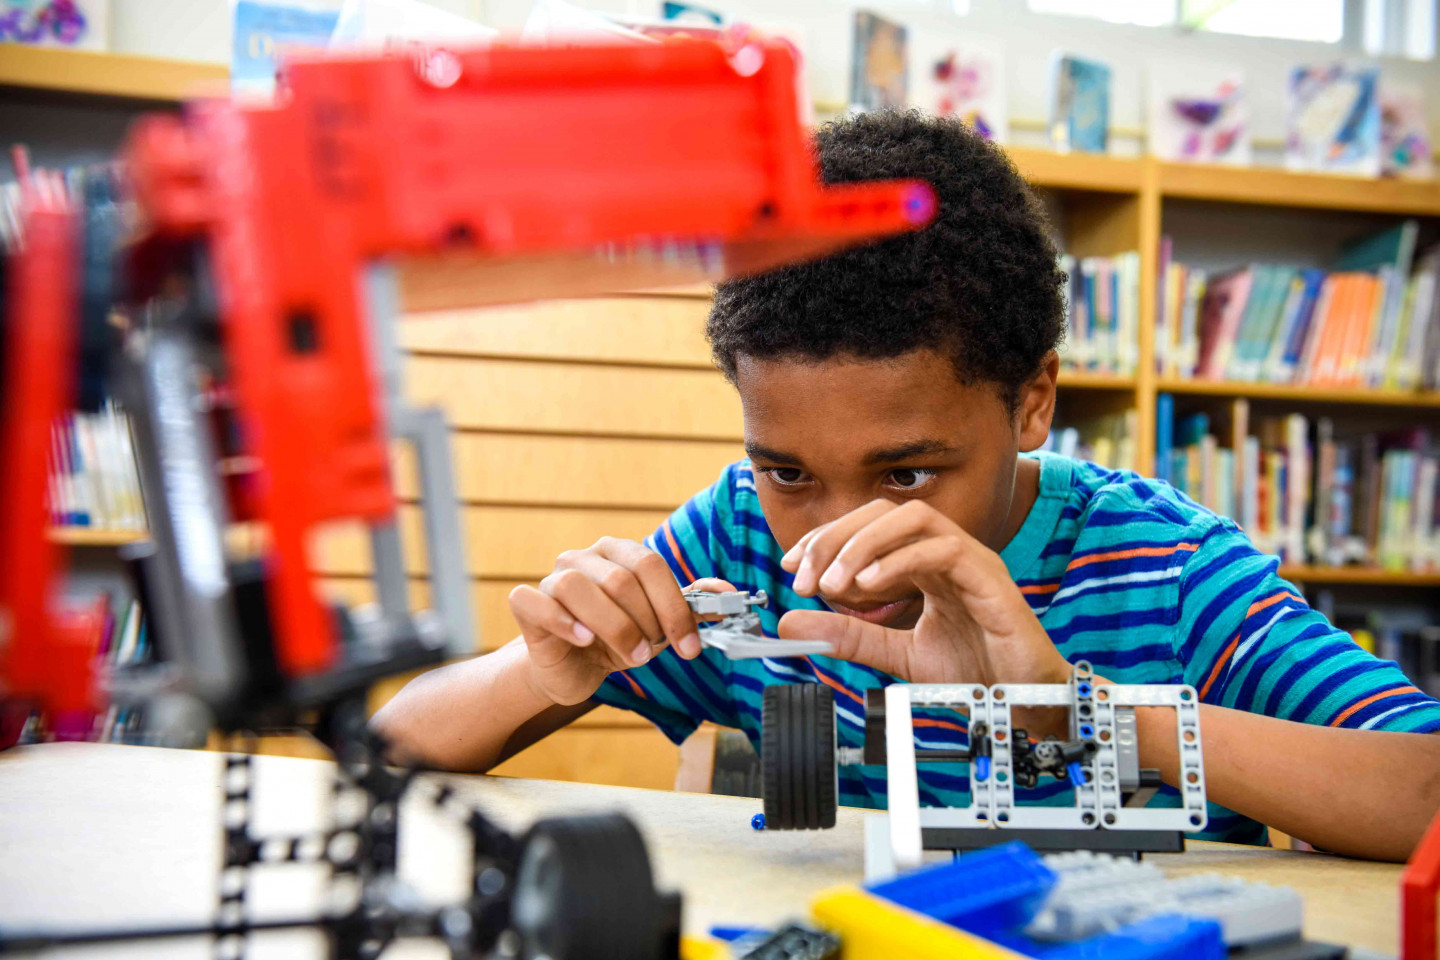 A child works on an engineering project in a classroom.